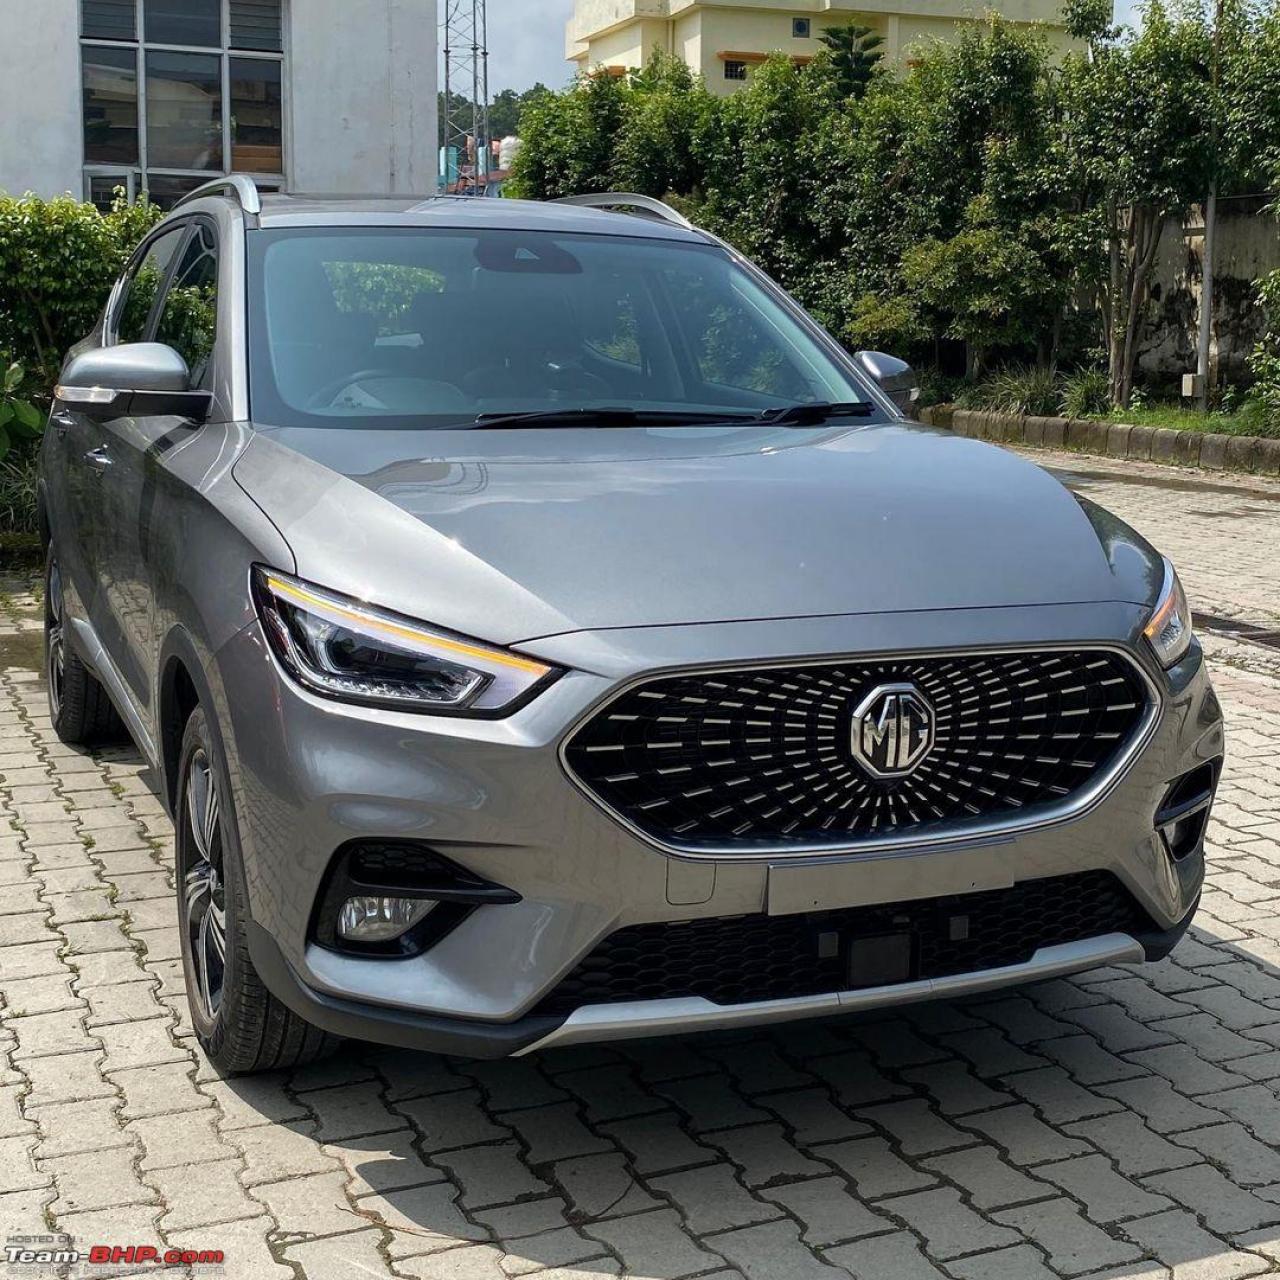 MG Astor SUV unveiled ahead of India launch